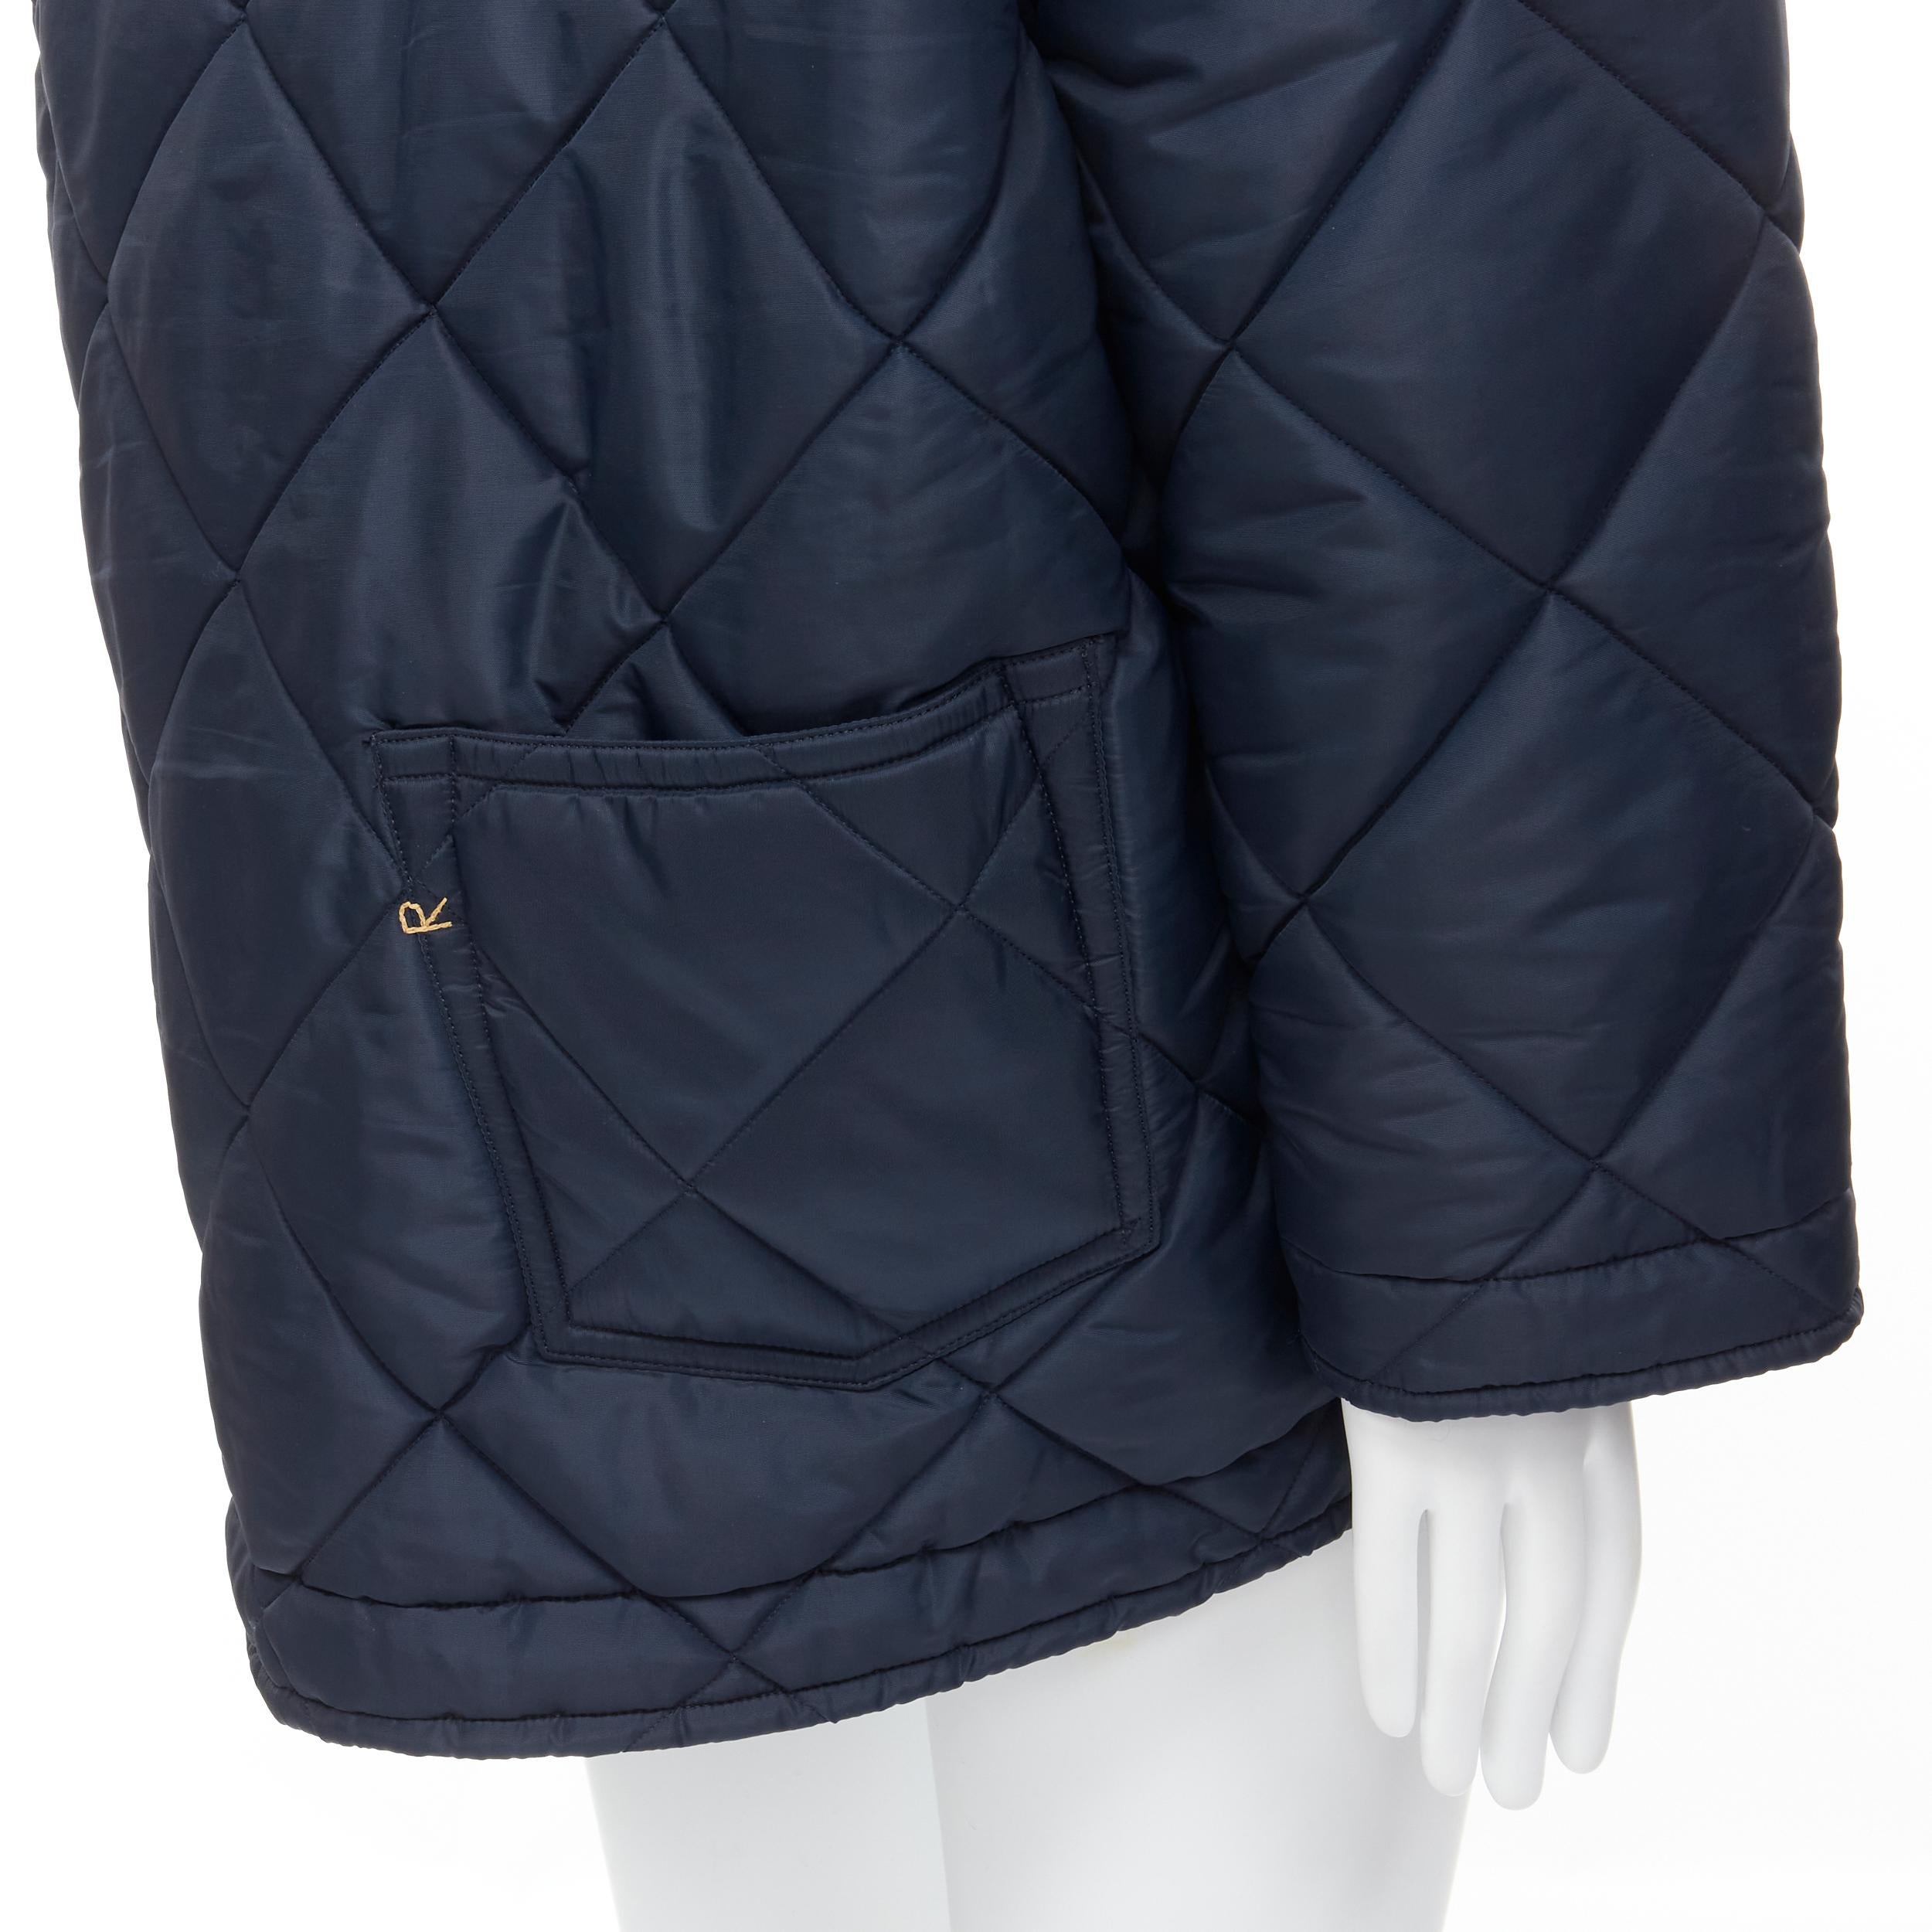 45RPM navy blue polyester padded diamond quilted nylon coat XL 
Reference: CAWG/A00212 
Brand: 45 RPM 
Material: Nylon 
Color: Navy 
Pattern: Solid 
Closure: Zip 
Extra Detail: Concealed zip with button closure. Diamond quilted nylon. Polyester